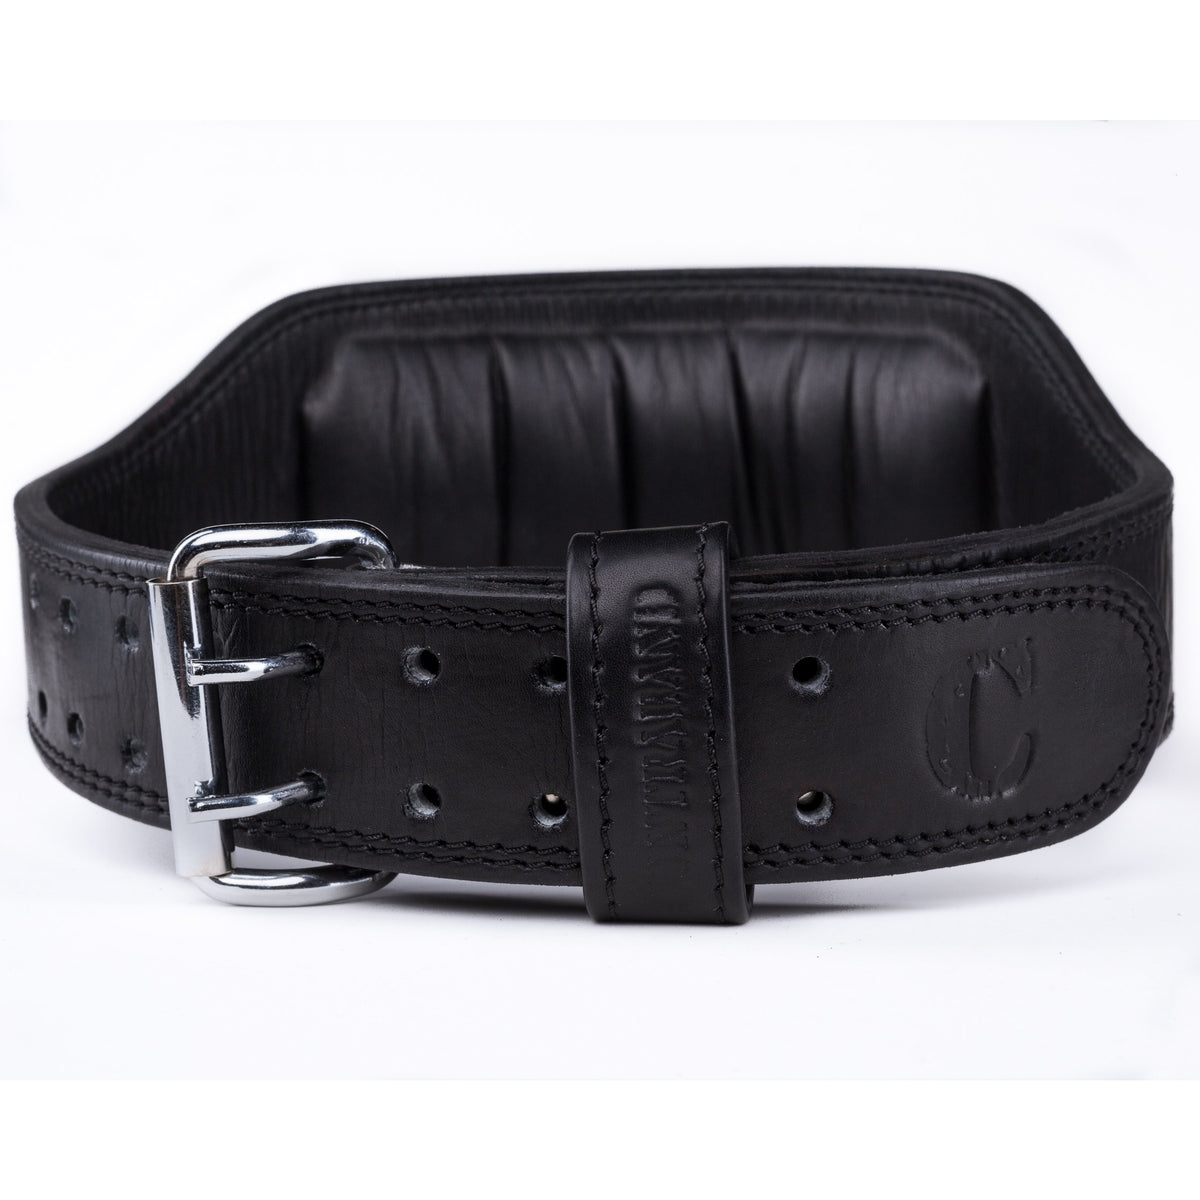 Contraband Black Label 4360 6in Top Grain Cowhide  Padded Leather Belt